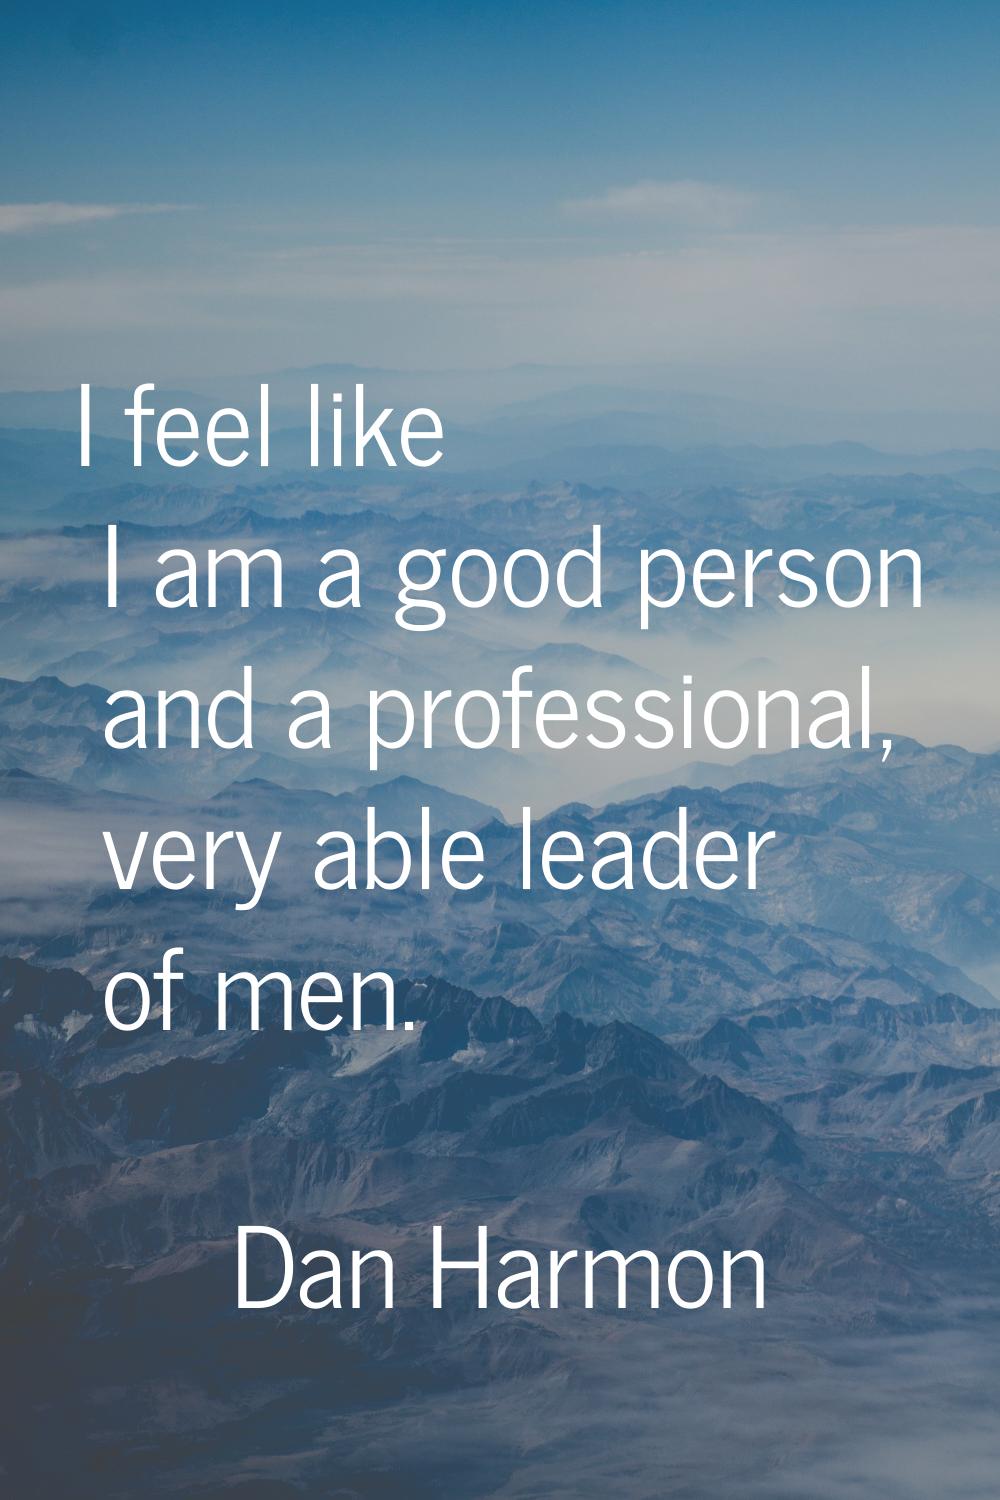 I feel like I am a good person and a professional, very able leader of men.